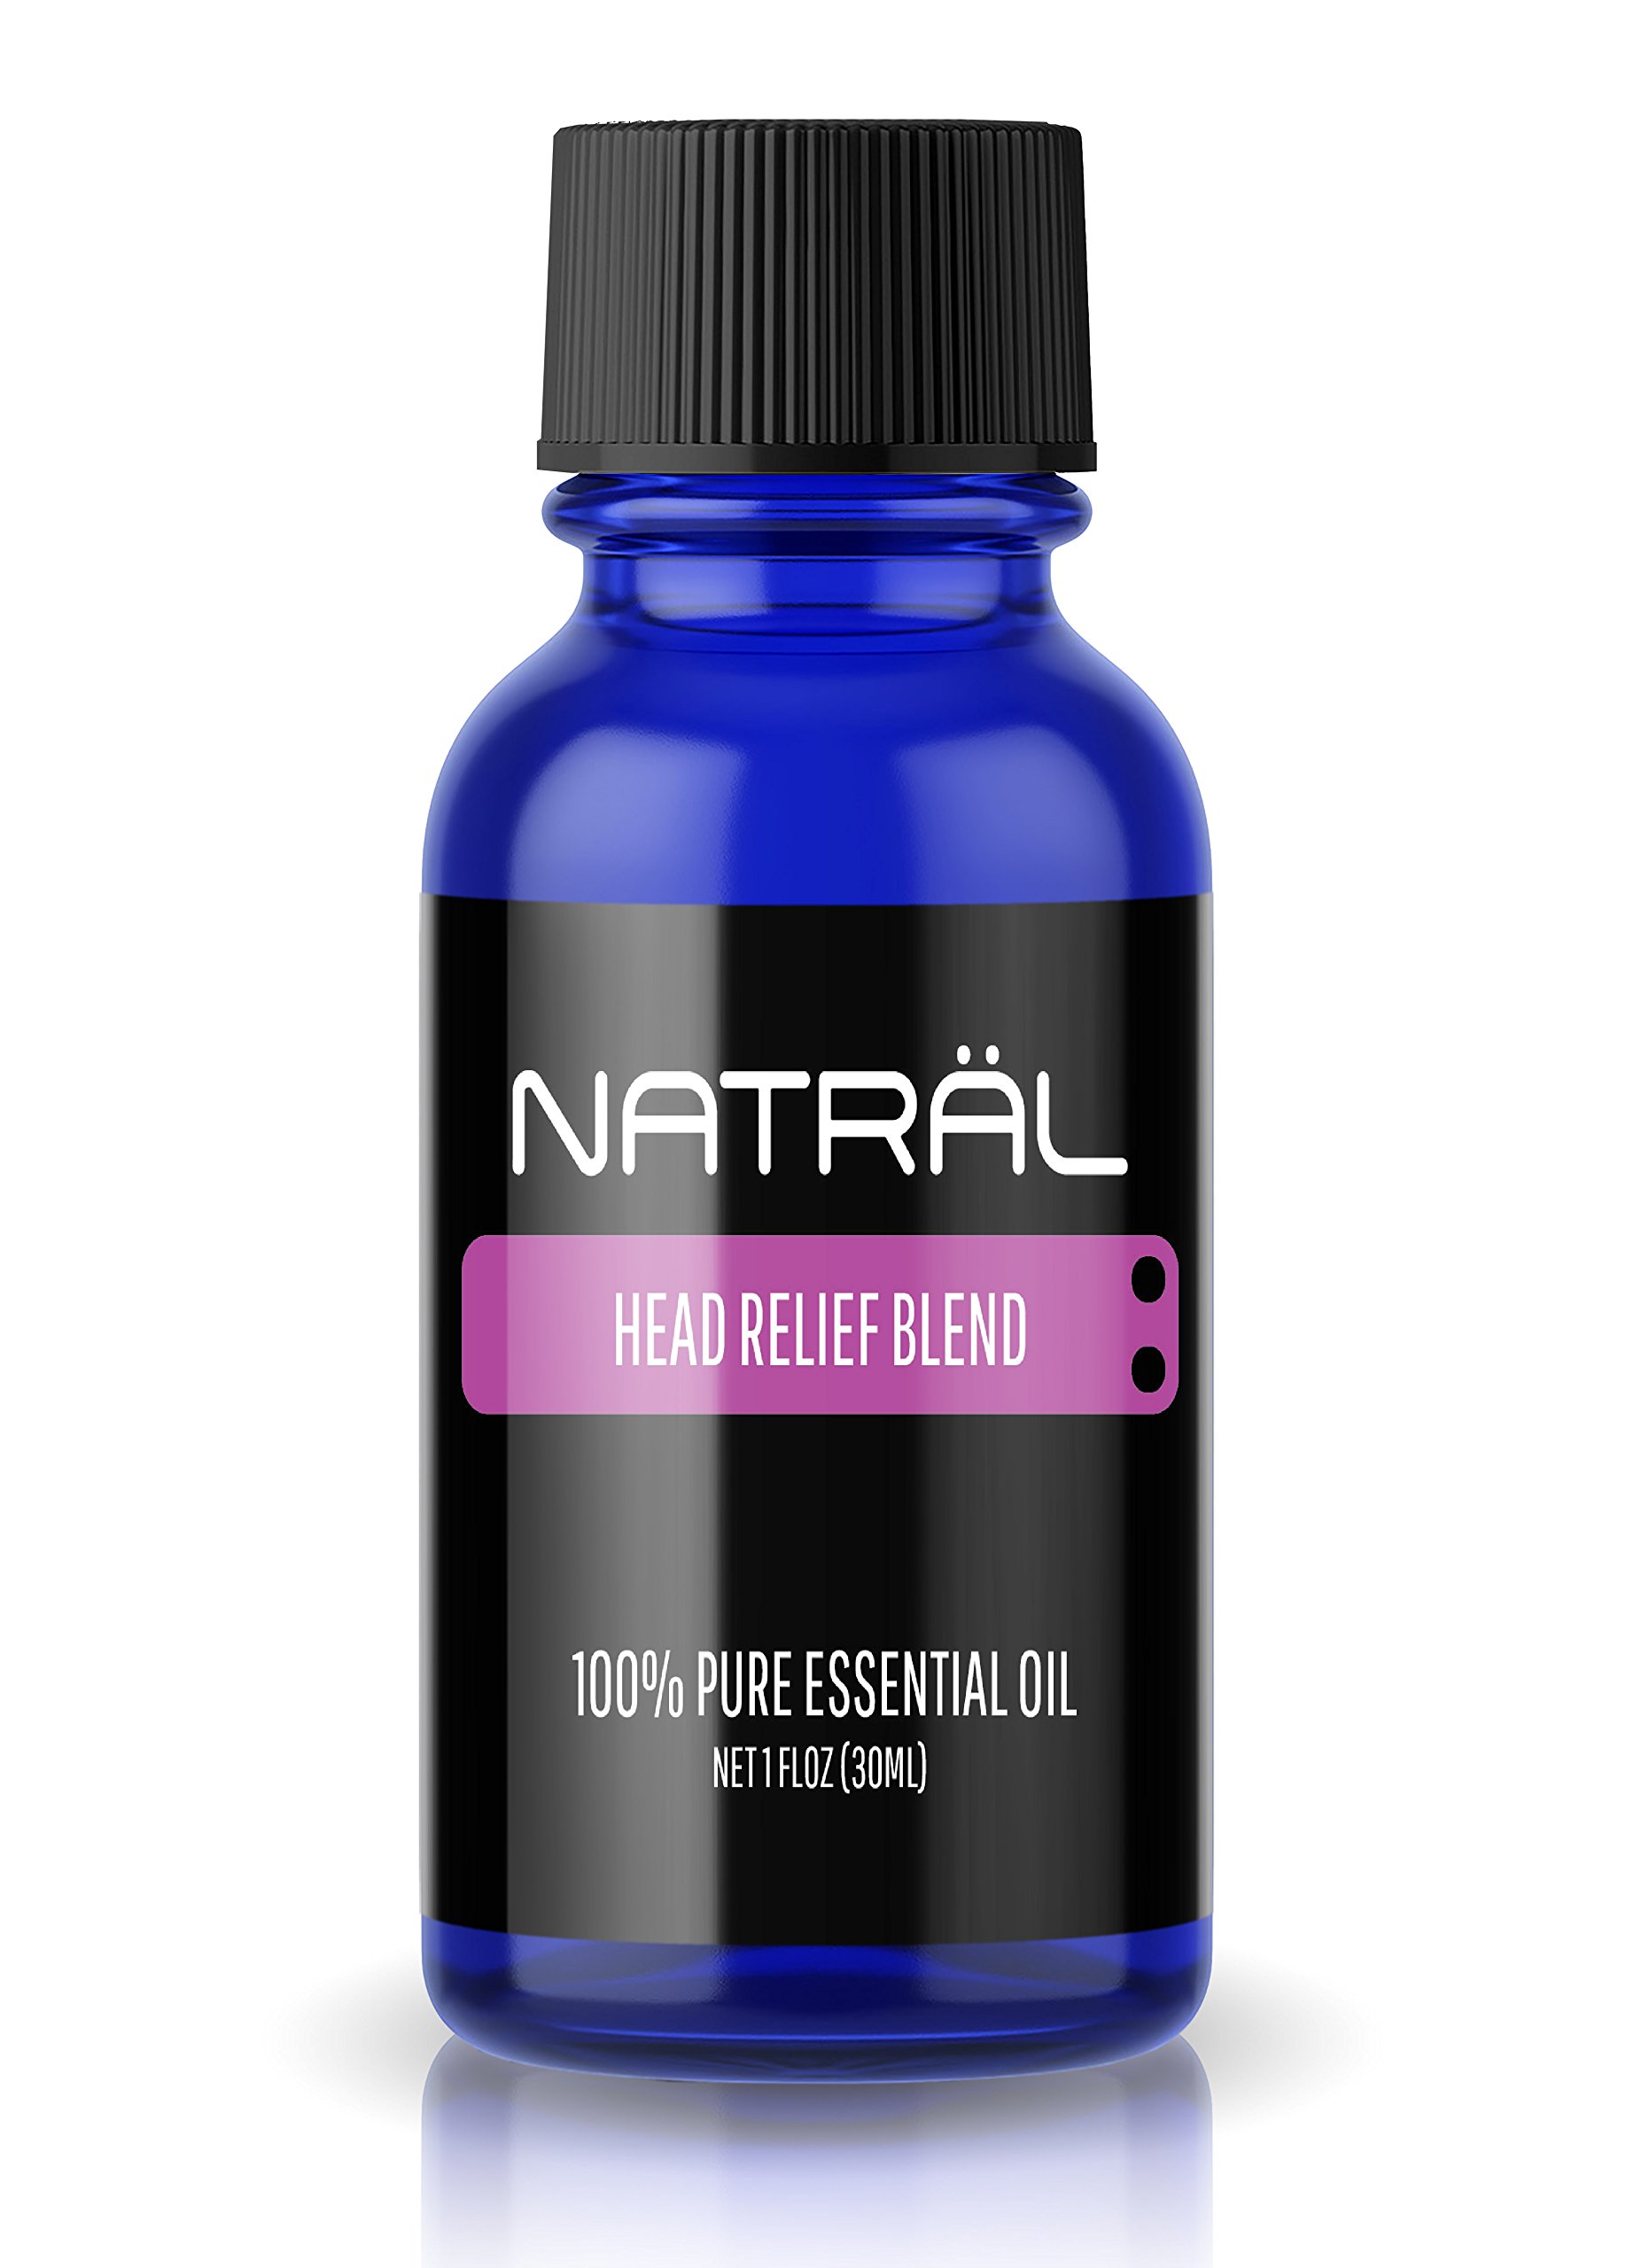 NATRÄL Head Relief Blend, 100% Pure and Natural Essential Oil, Large 1 Ounce Bottle